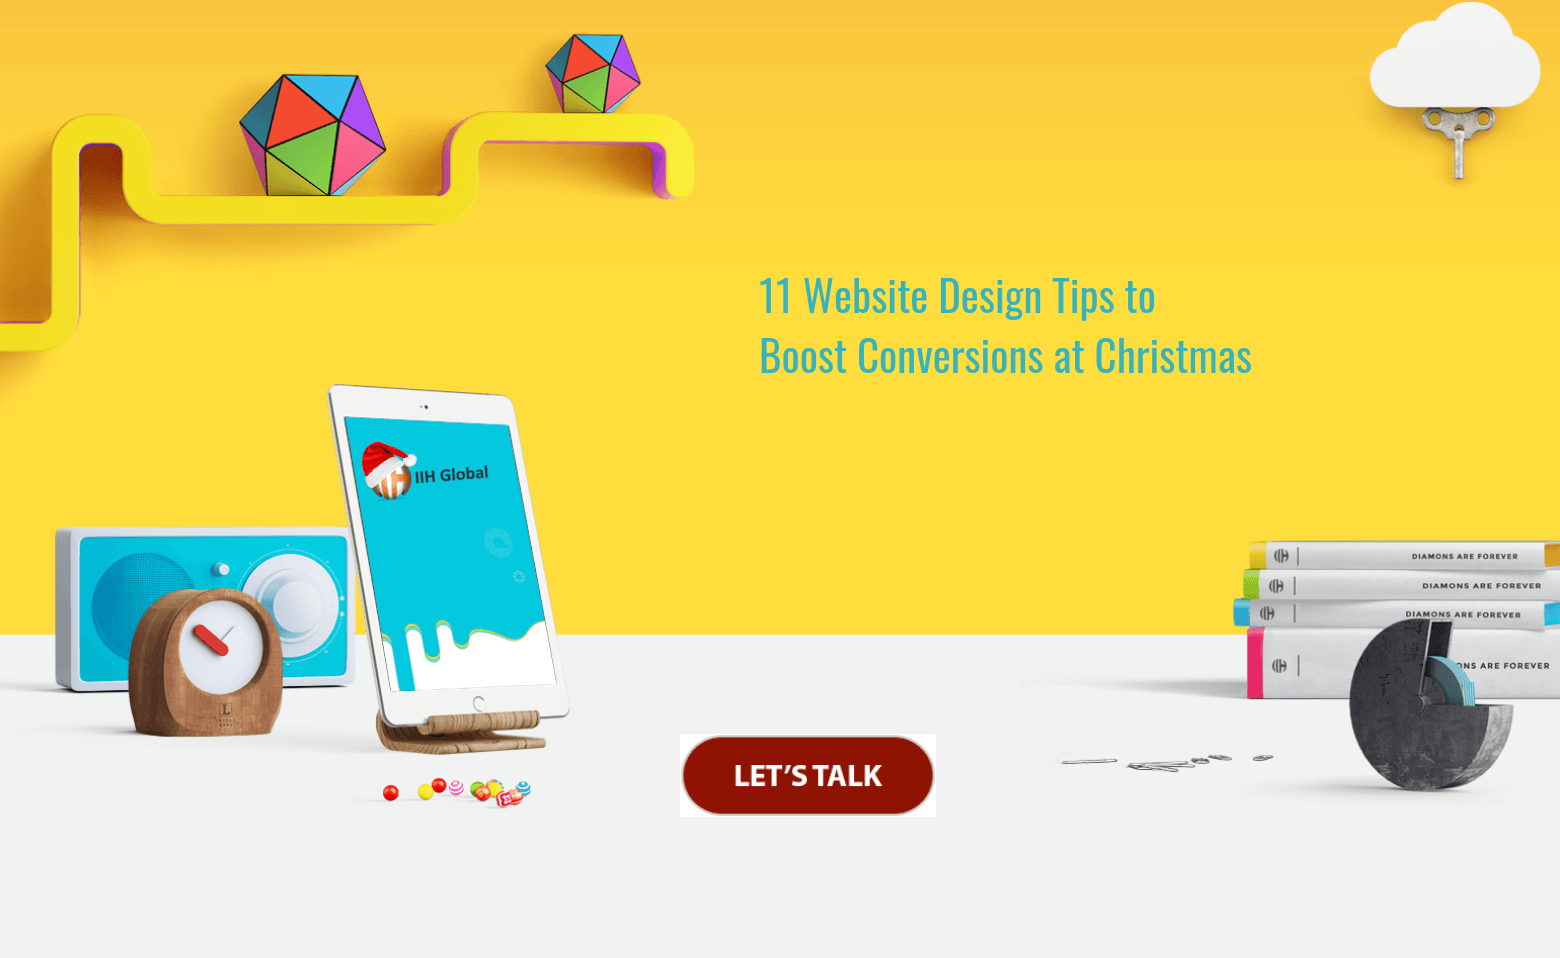 11 Website Design Tips to Boost Conversions at Christmas